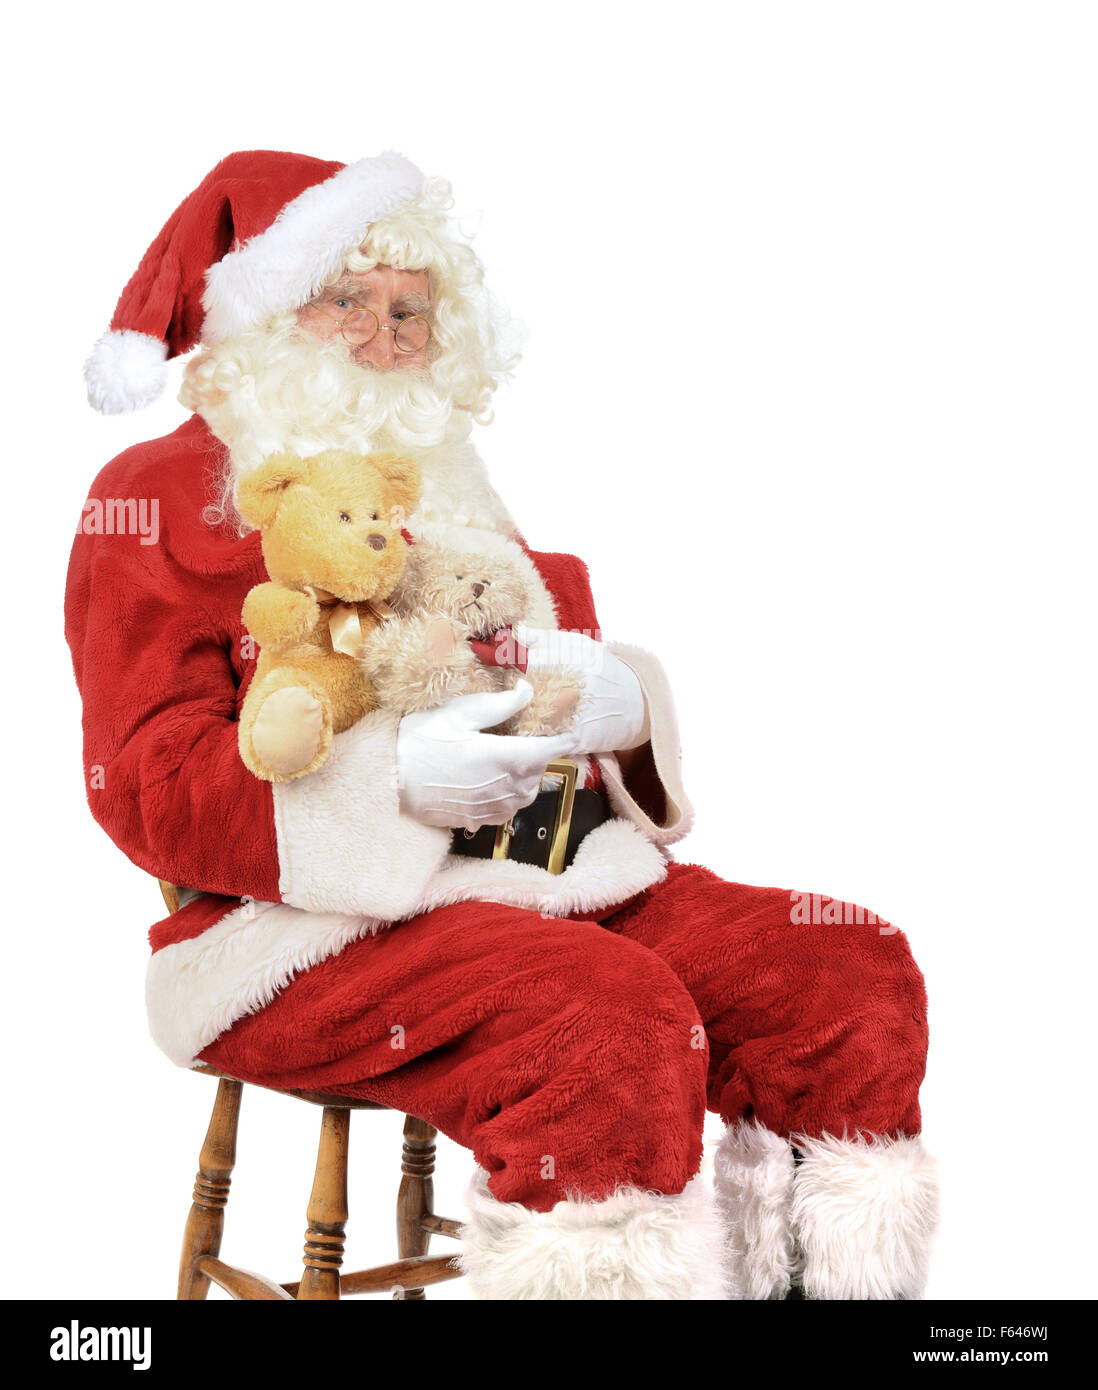 Santa Claus sitting in a chair holding teddy bears for Christmas Stock Photo